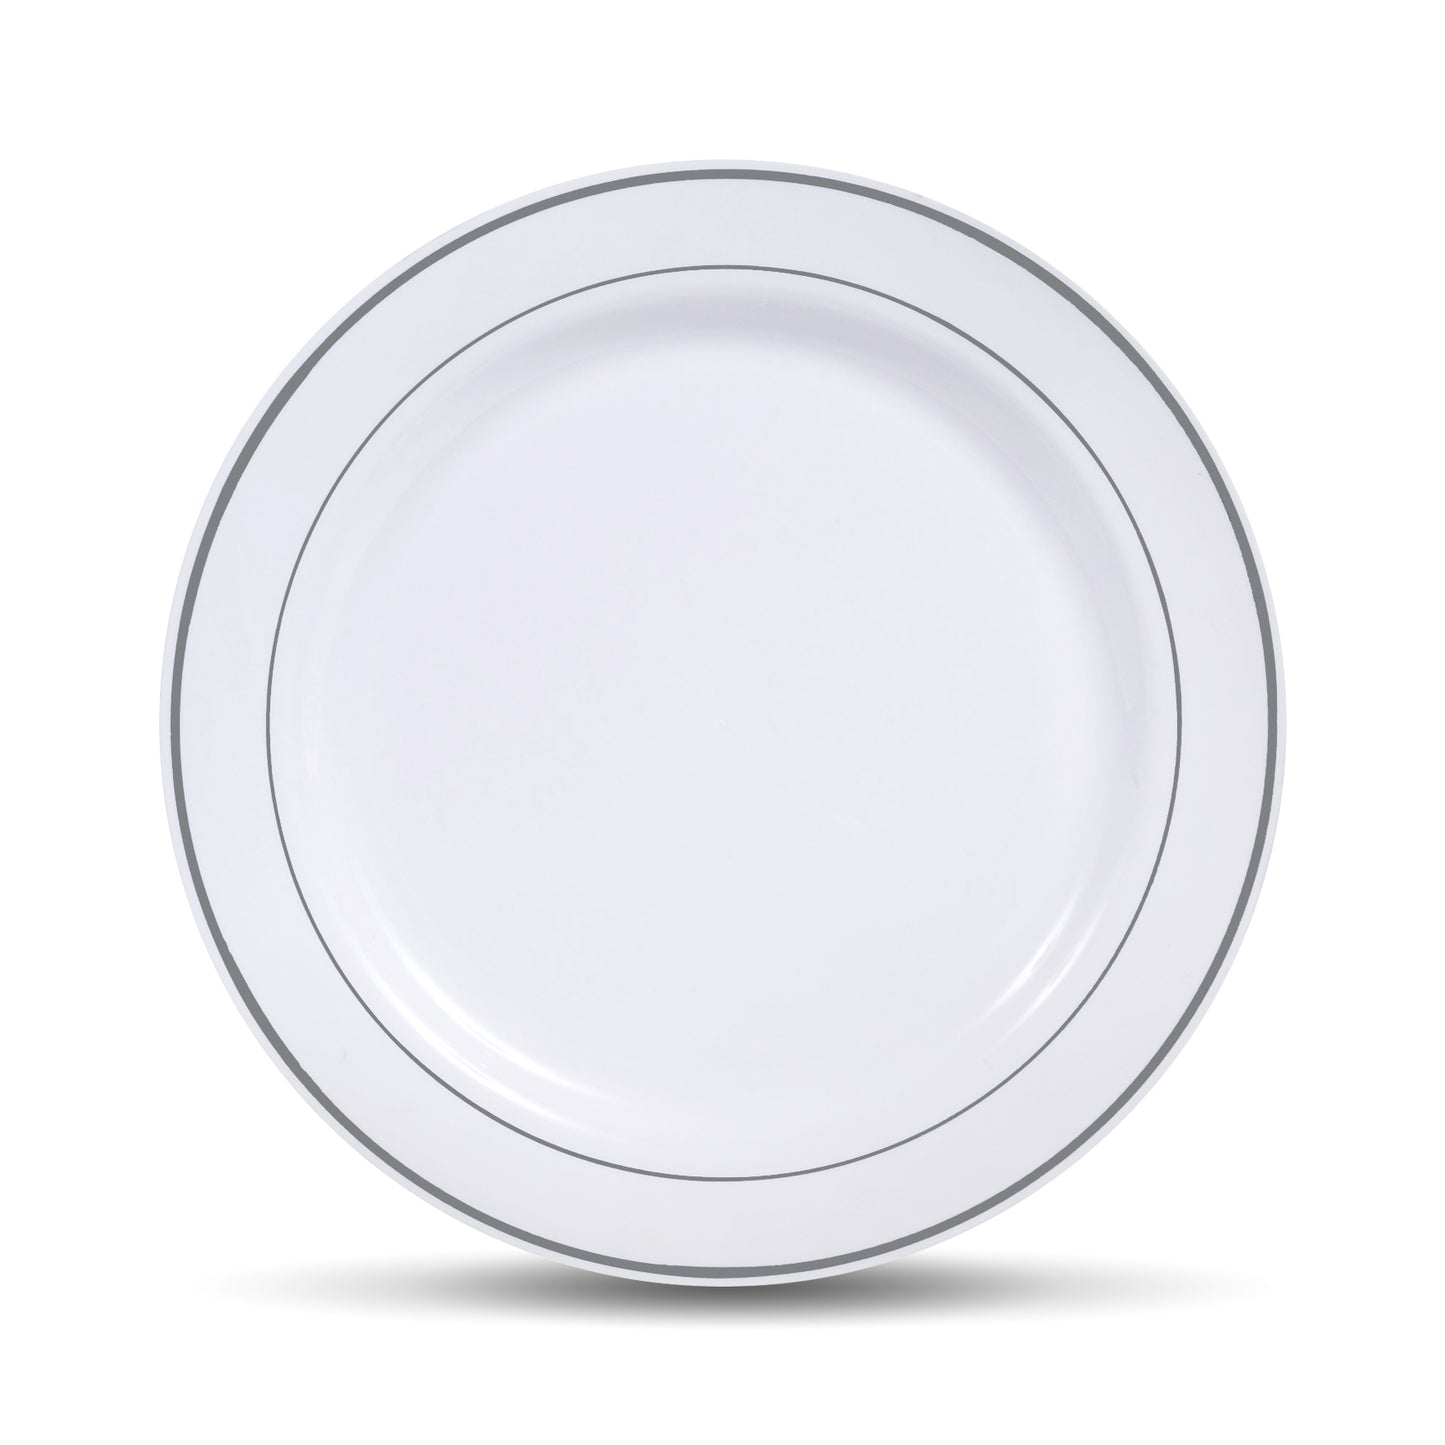 50 pc. White with Silver Rim Plastic Salad plates: Sturdy and Disposable